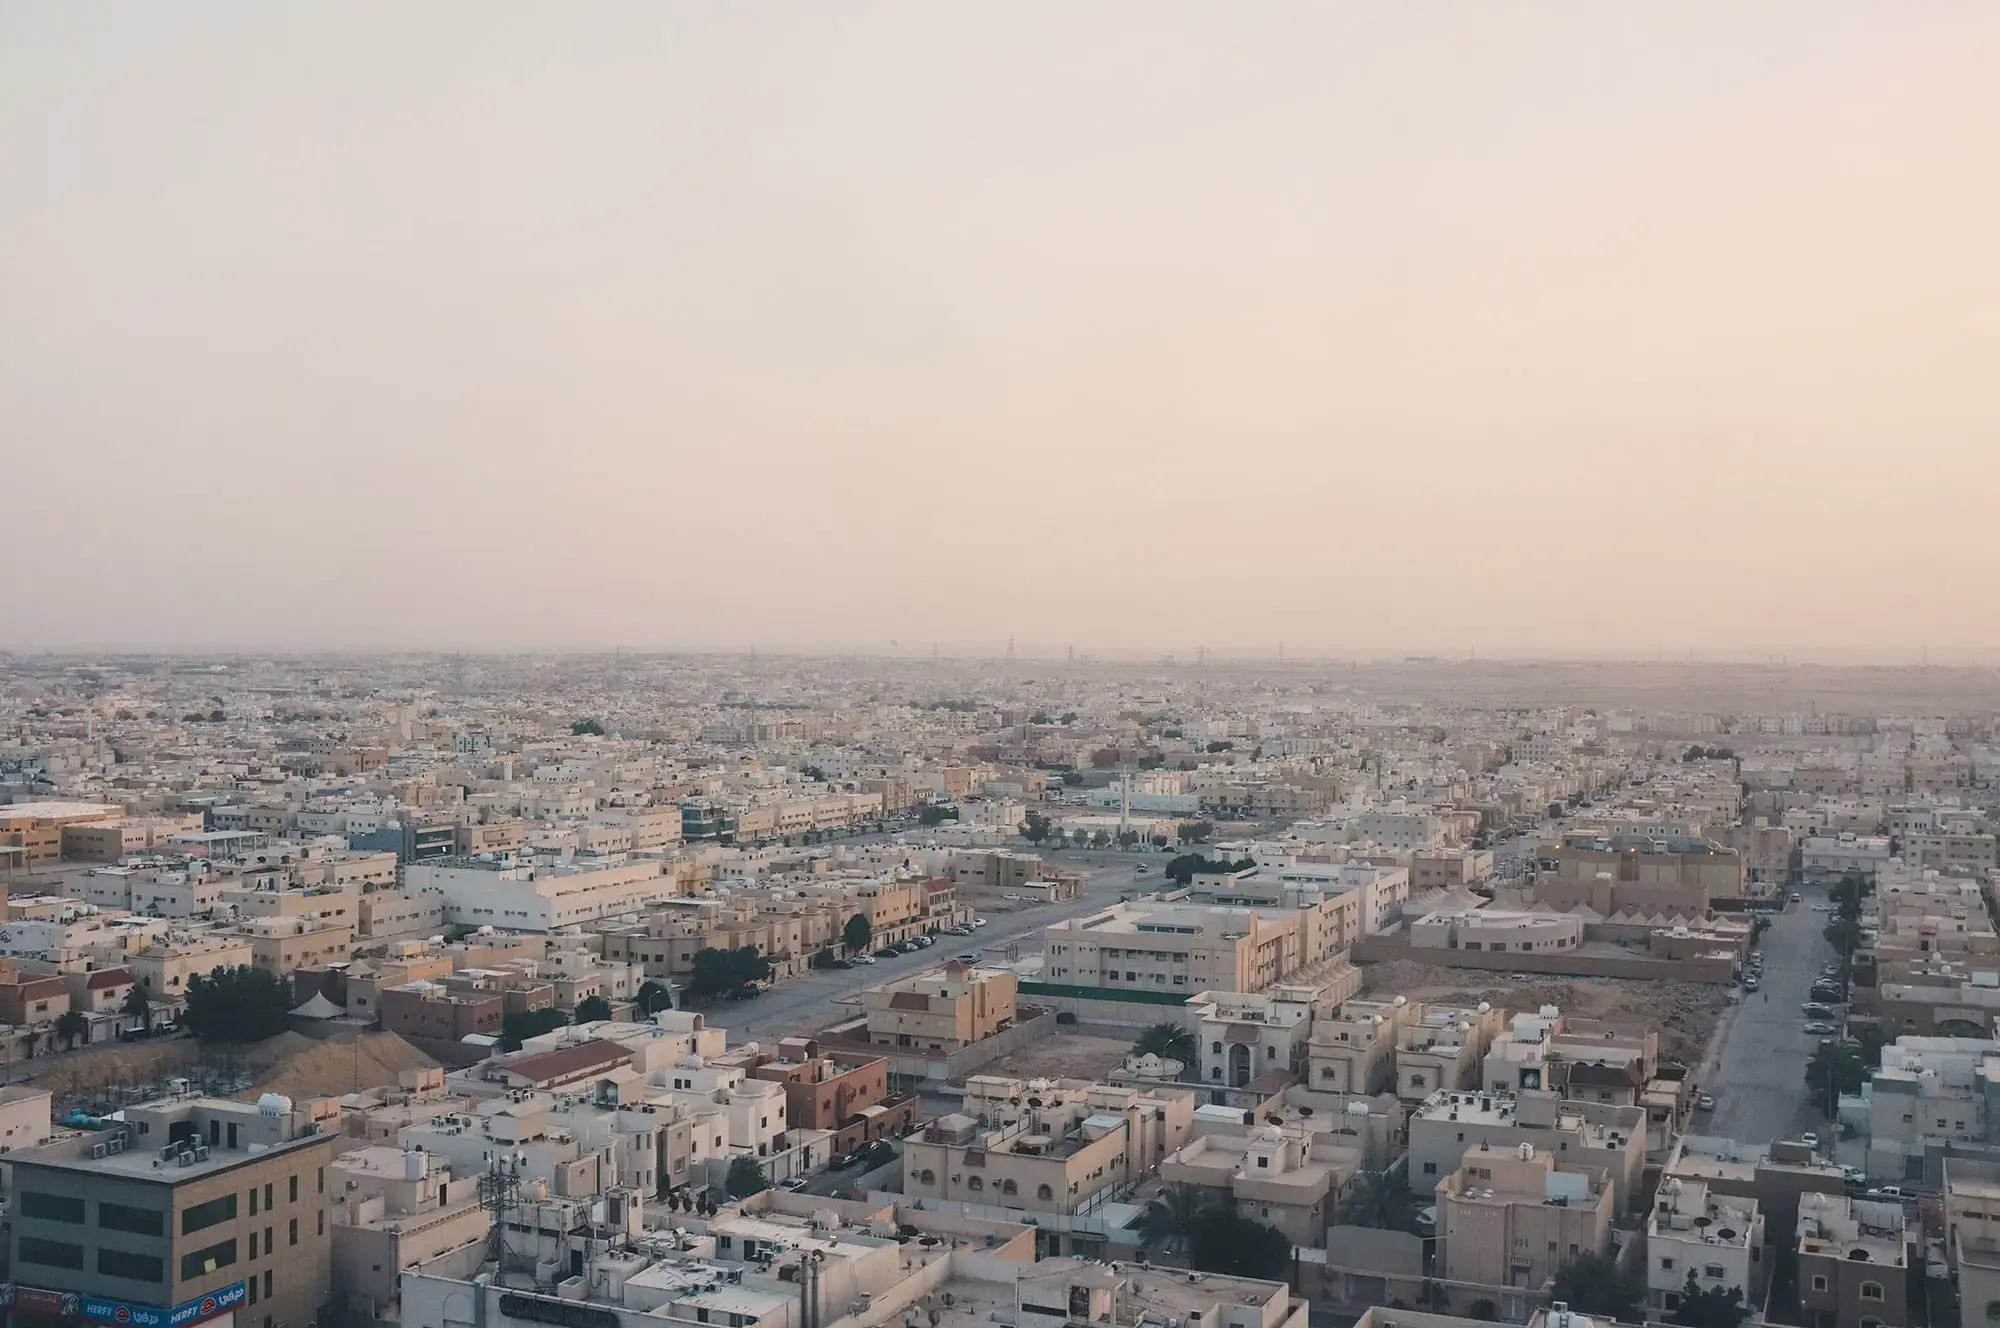 A middle eastern city